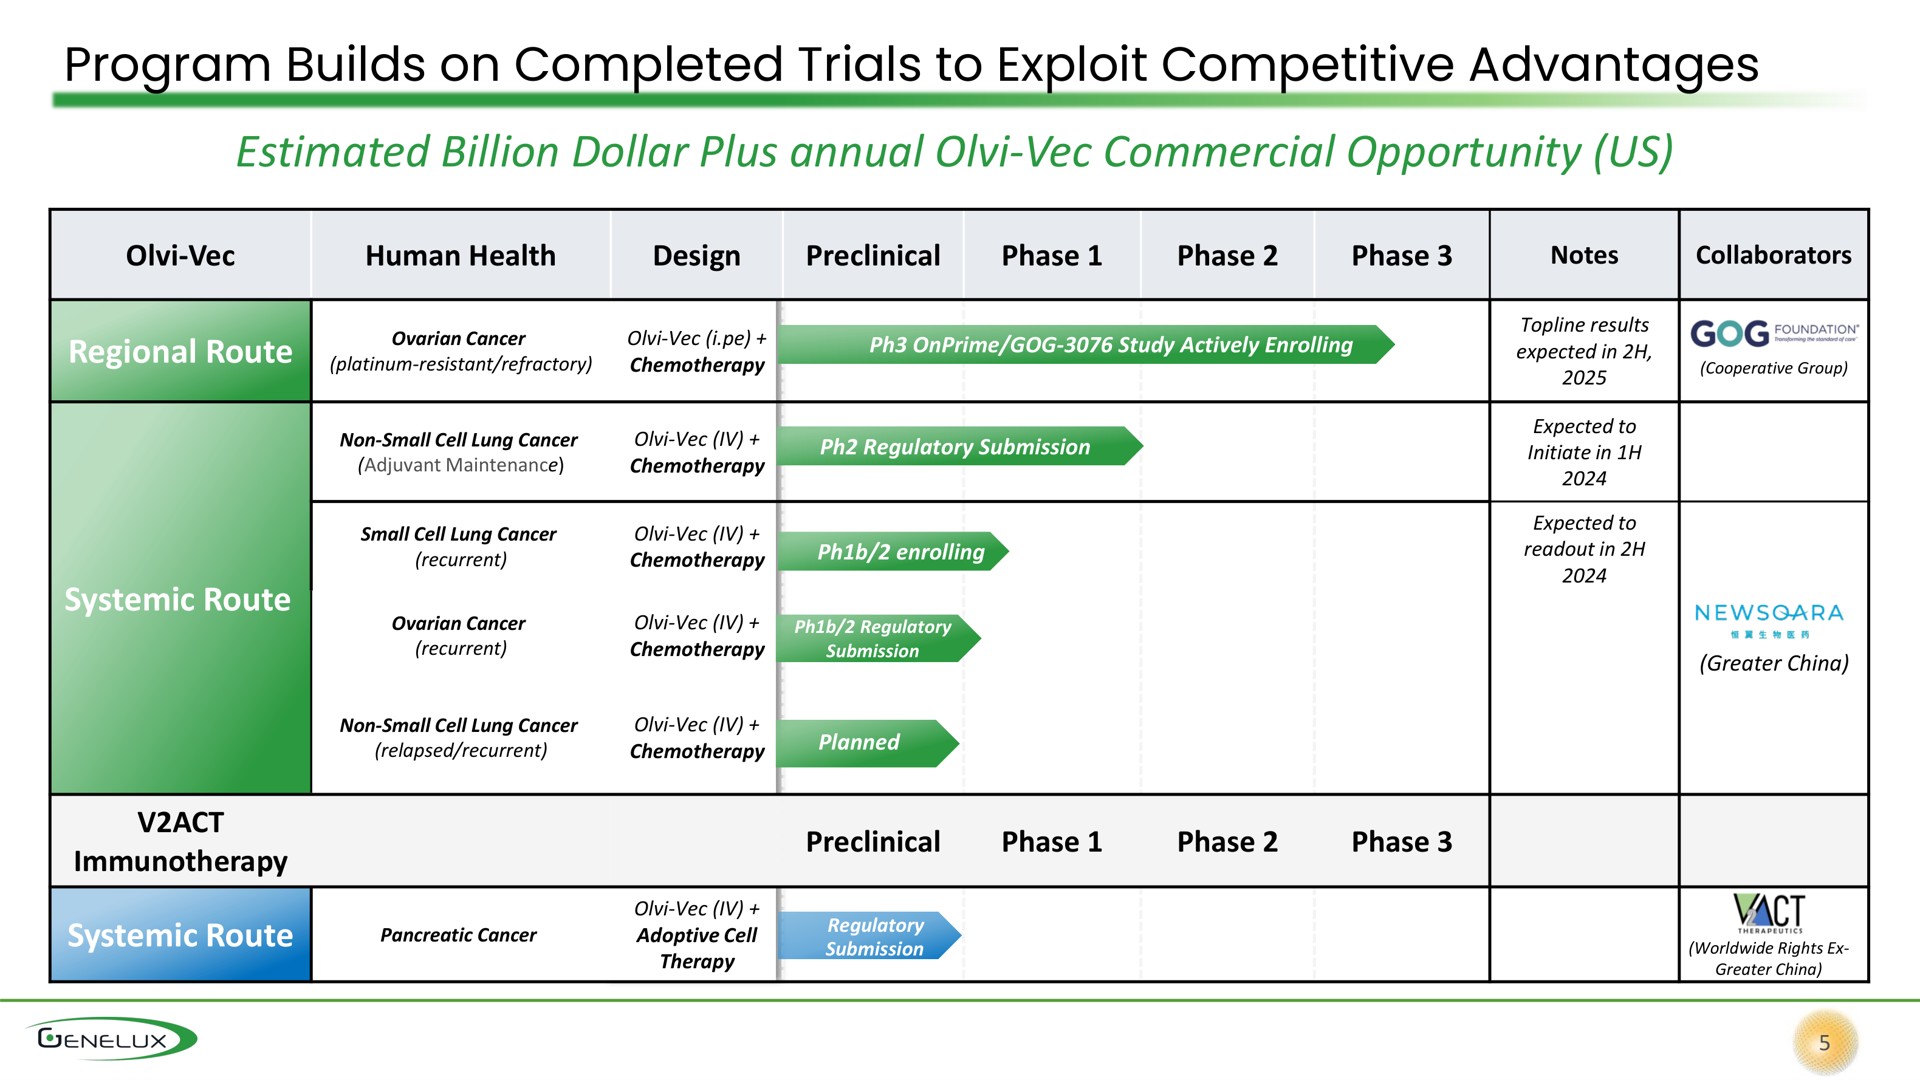 program builds on completed trials to exploit competitive advantages estimated billion dollar plus annual commercial opportunity us | Genelux